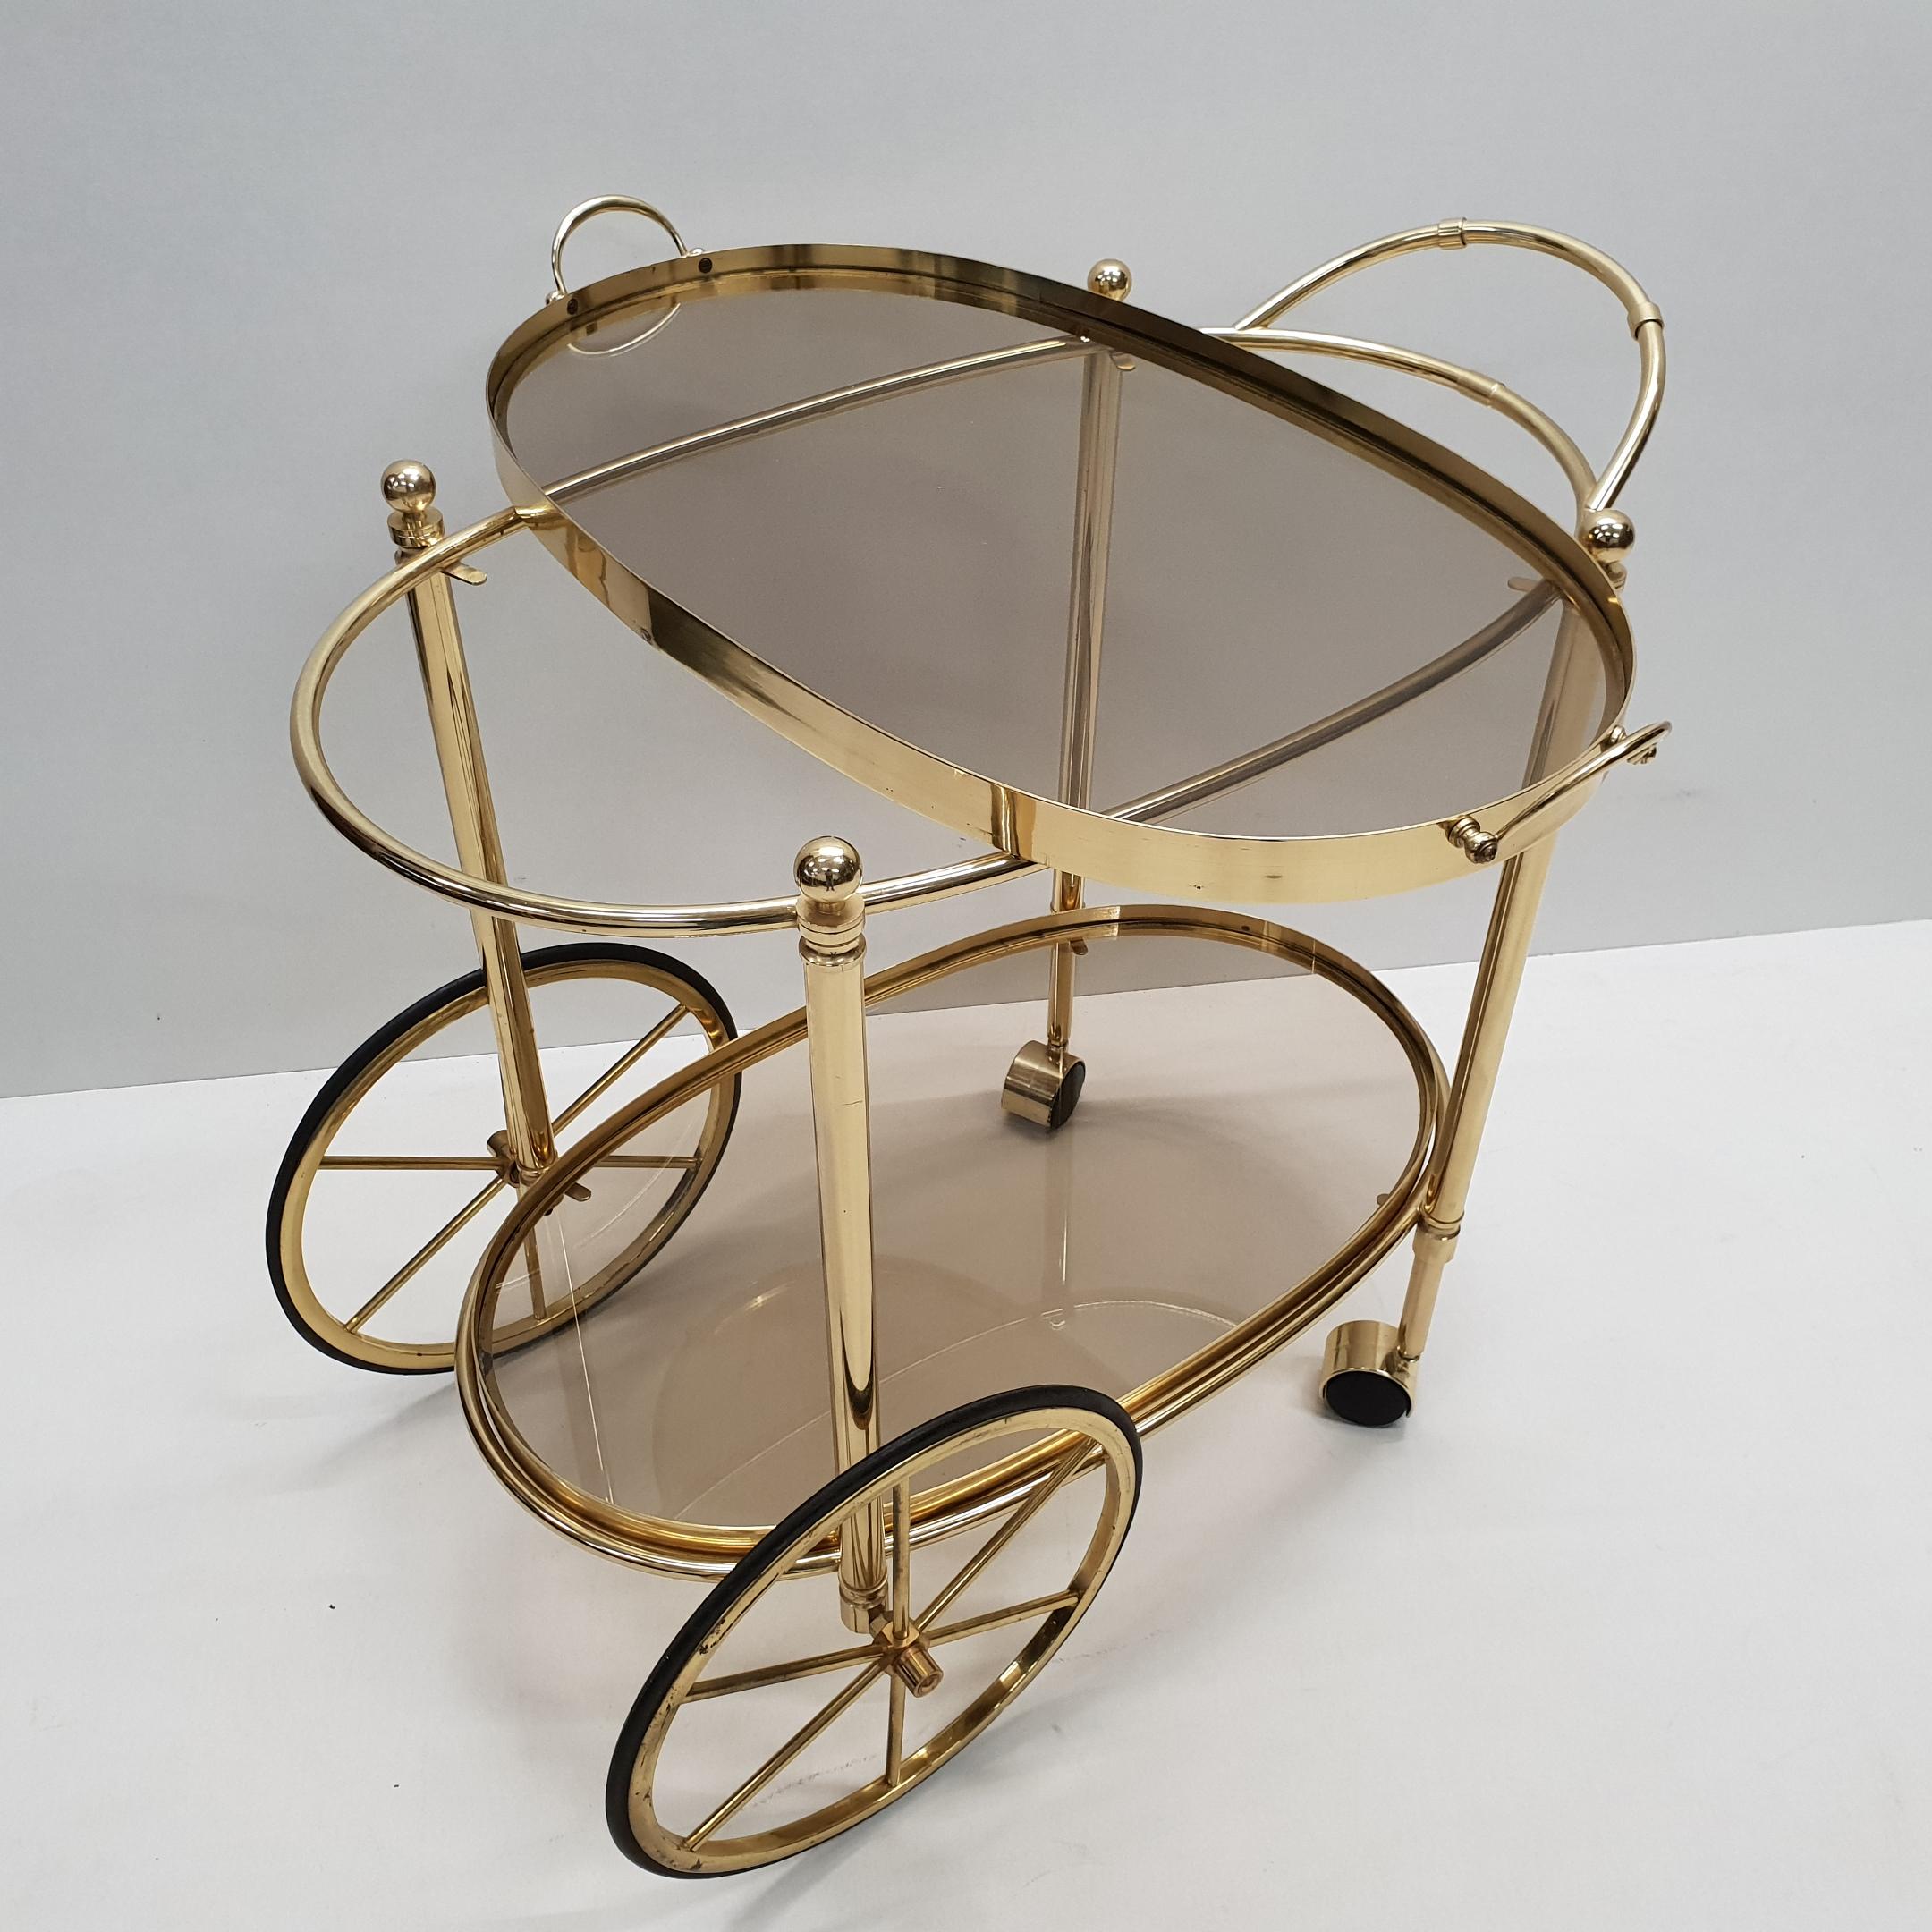 High Quality Italian Brass Trolley Bar Cart with Smoked Glass, 1980s For Sale 1